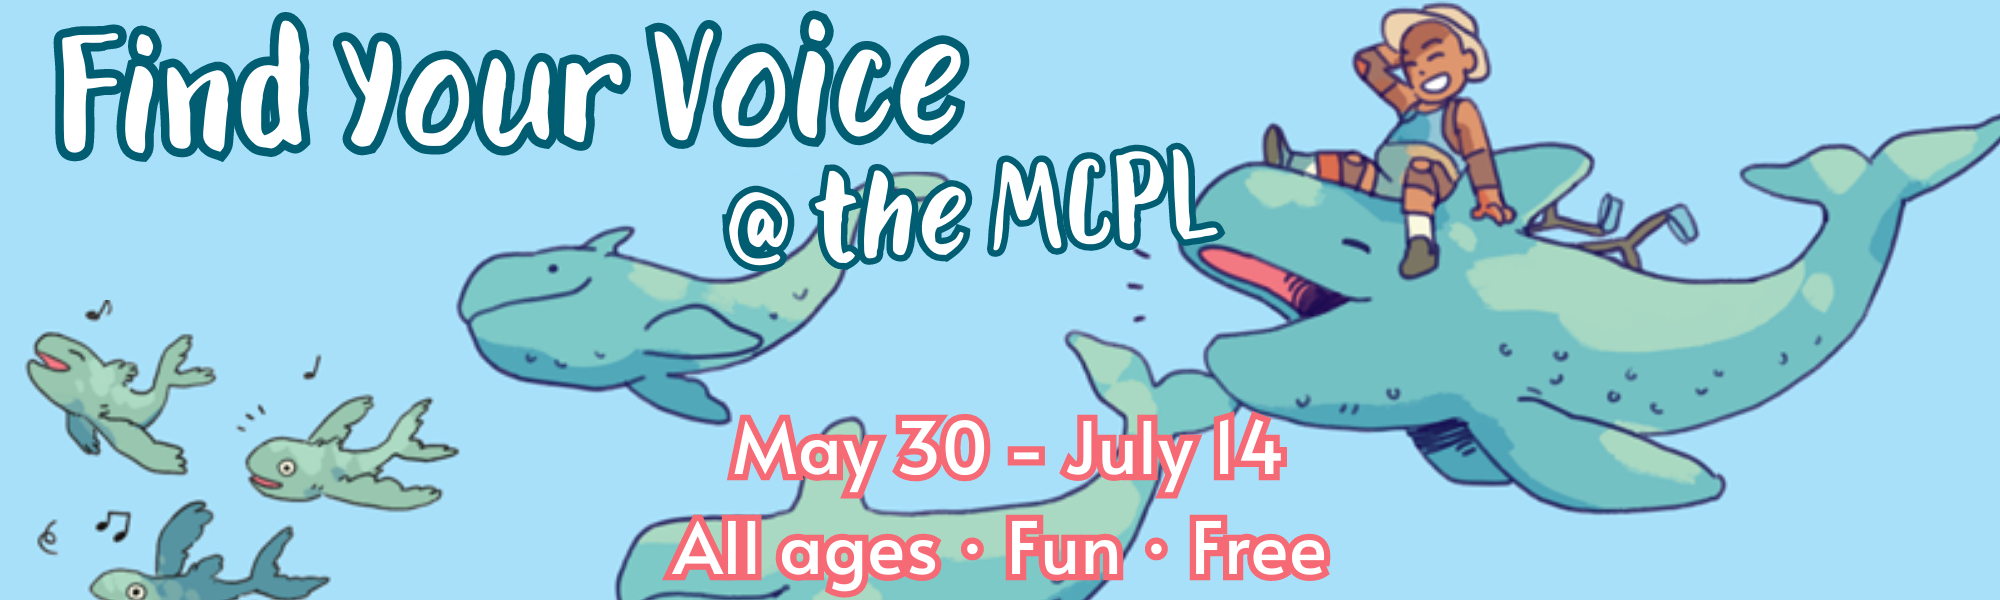 Find your voice @ the MCPL.png